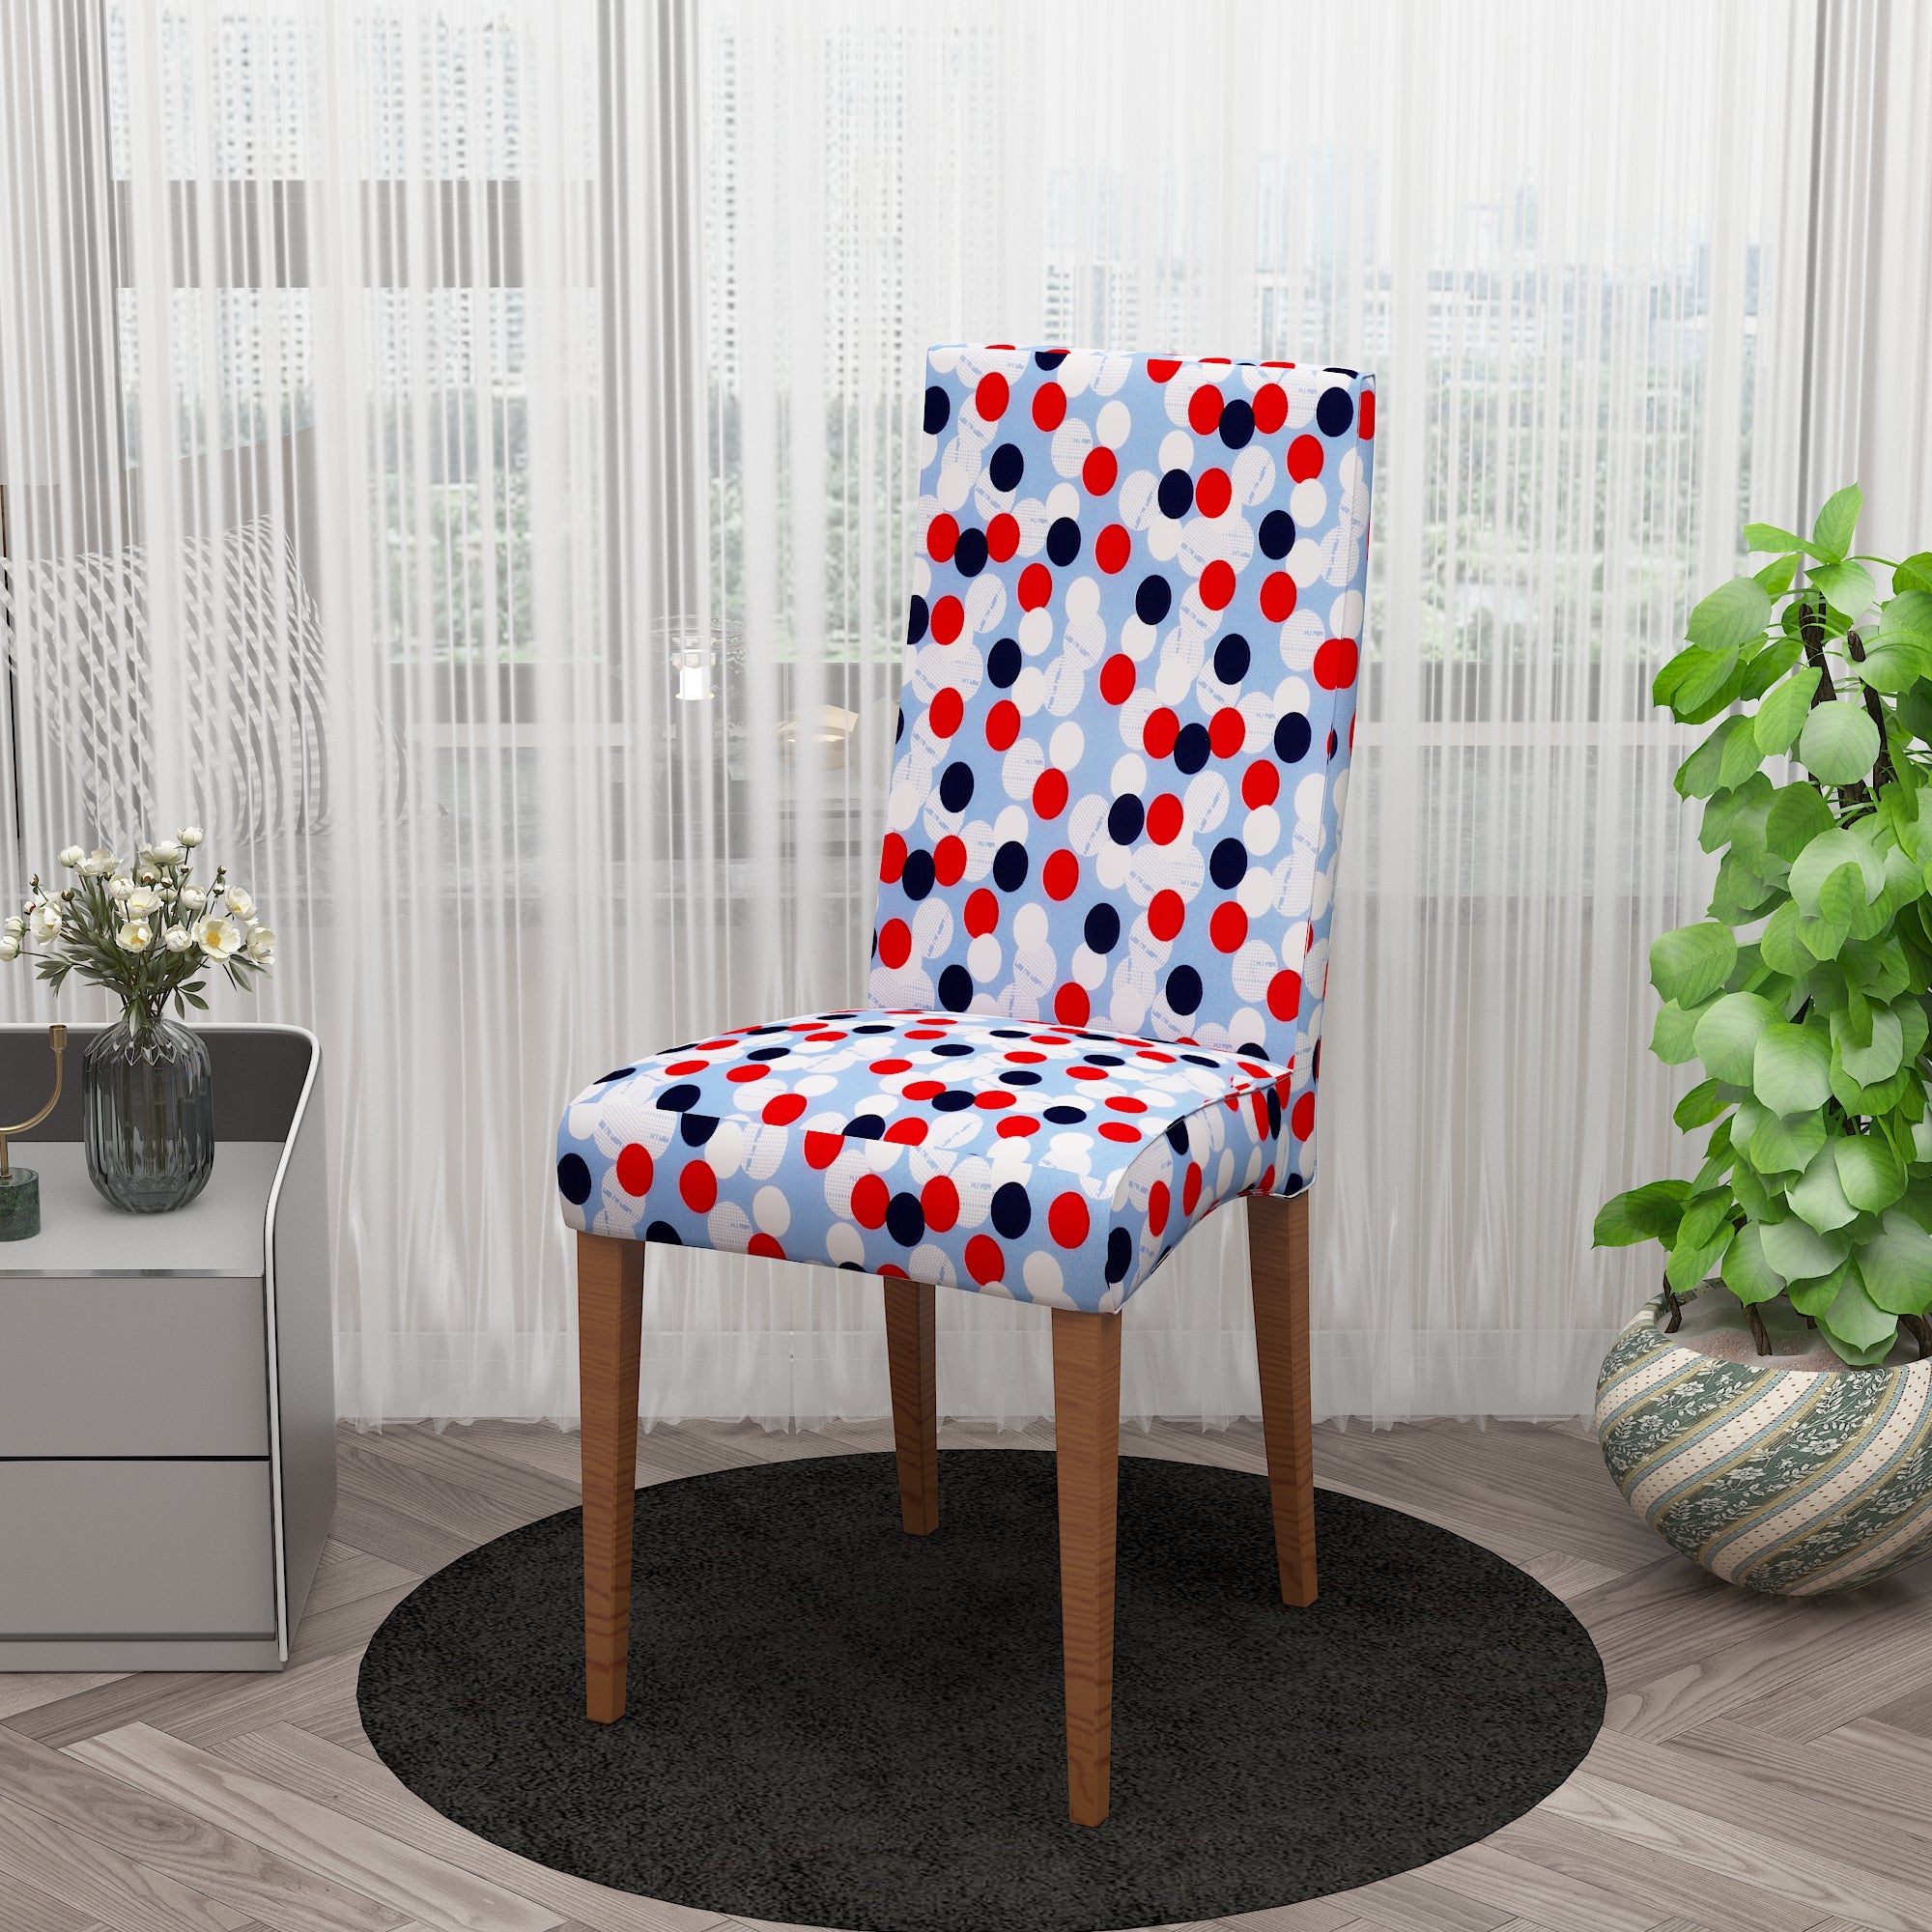 Polyester Spandex Stretchable Printed Chair Cover, MG21